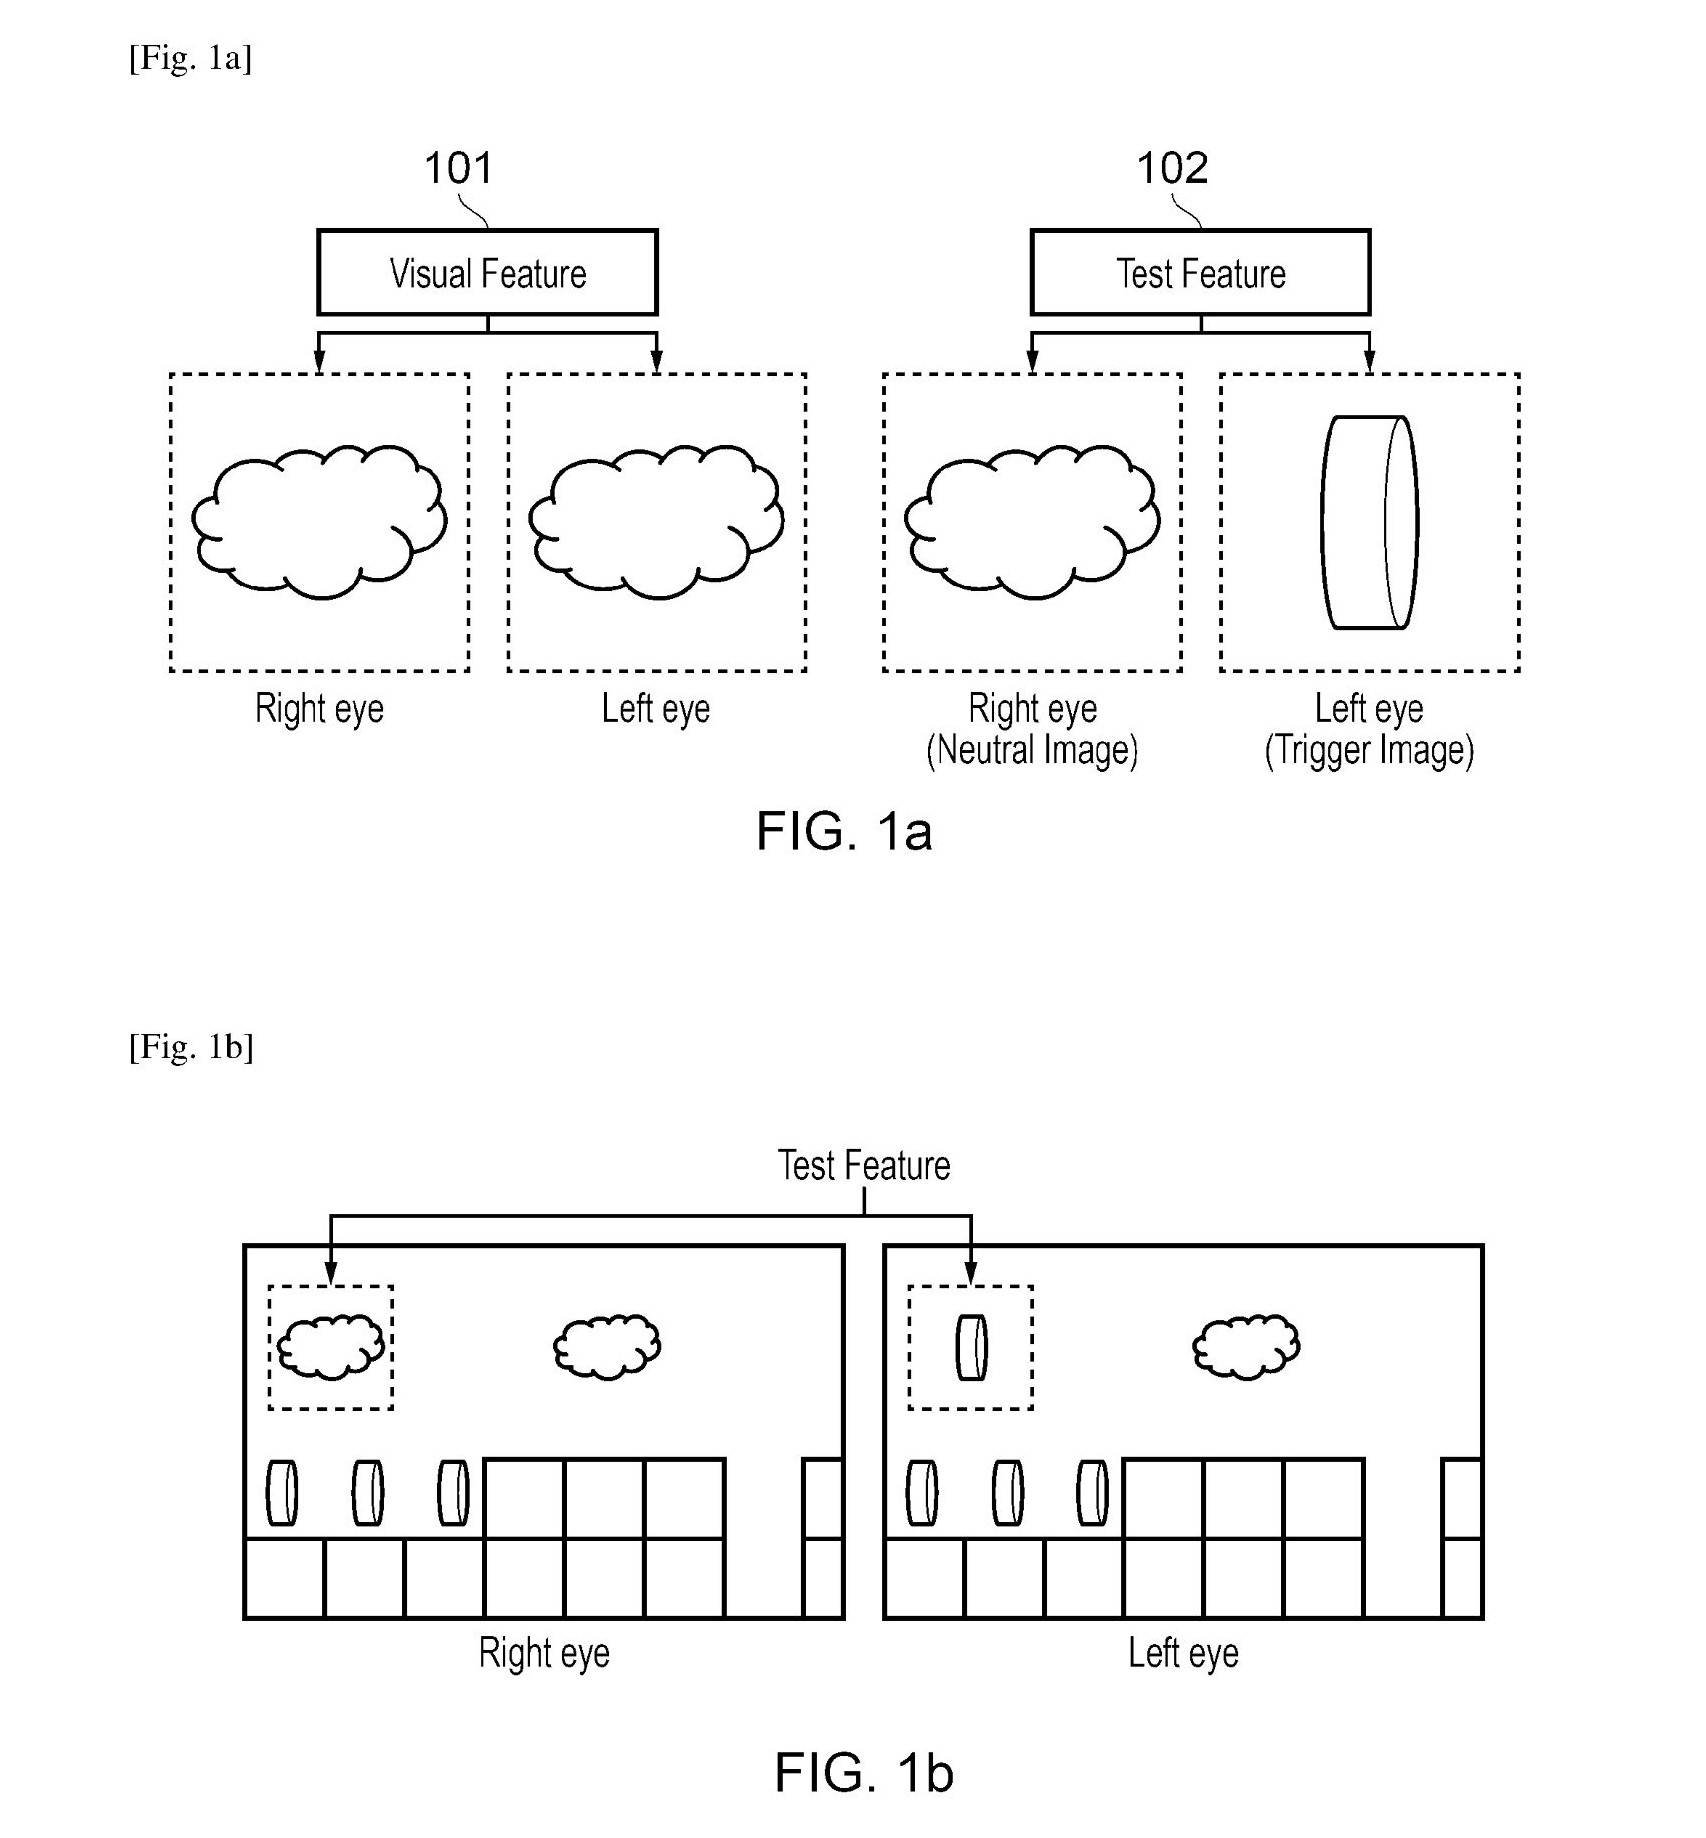 sony-patent-detecting-adhd-and-other-disorders.jpg